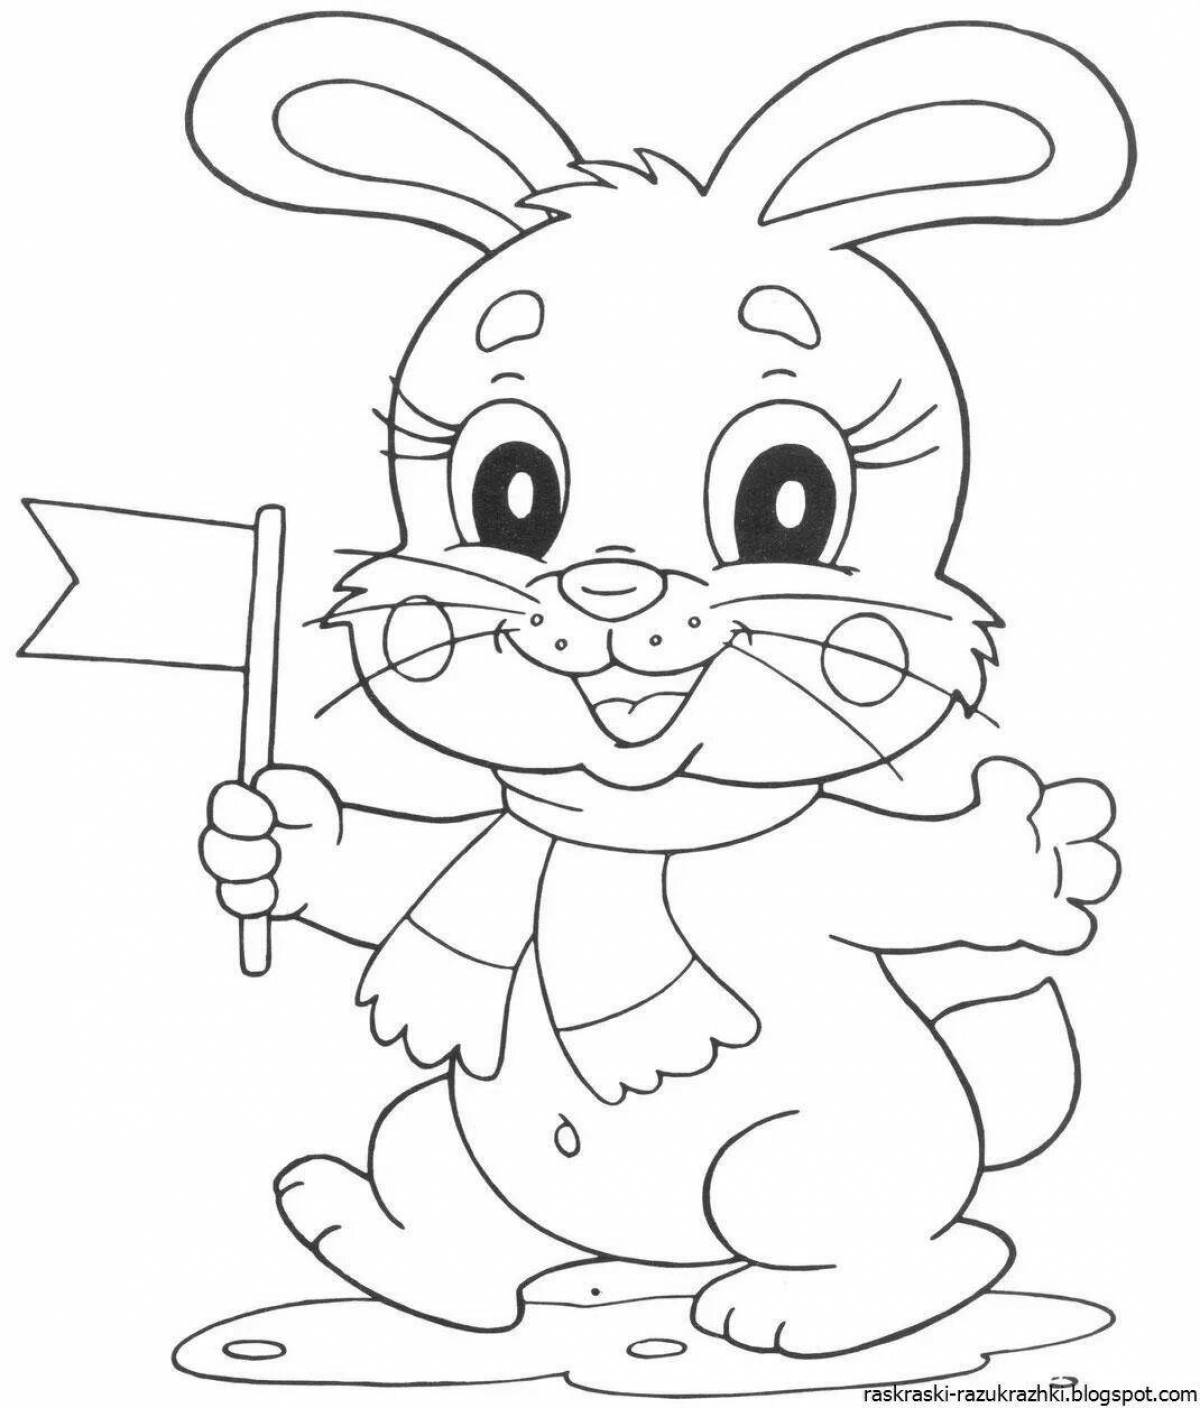 Colorful rabbit coloring book for kids 3 4